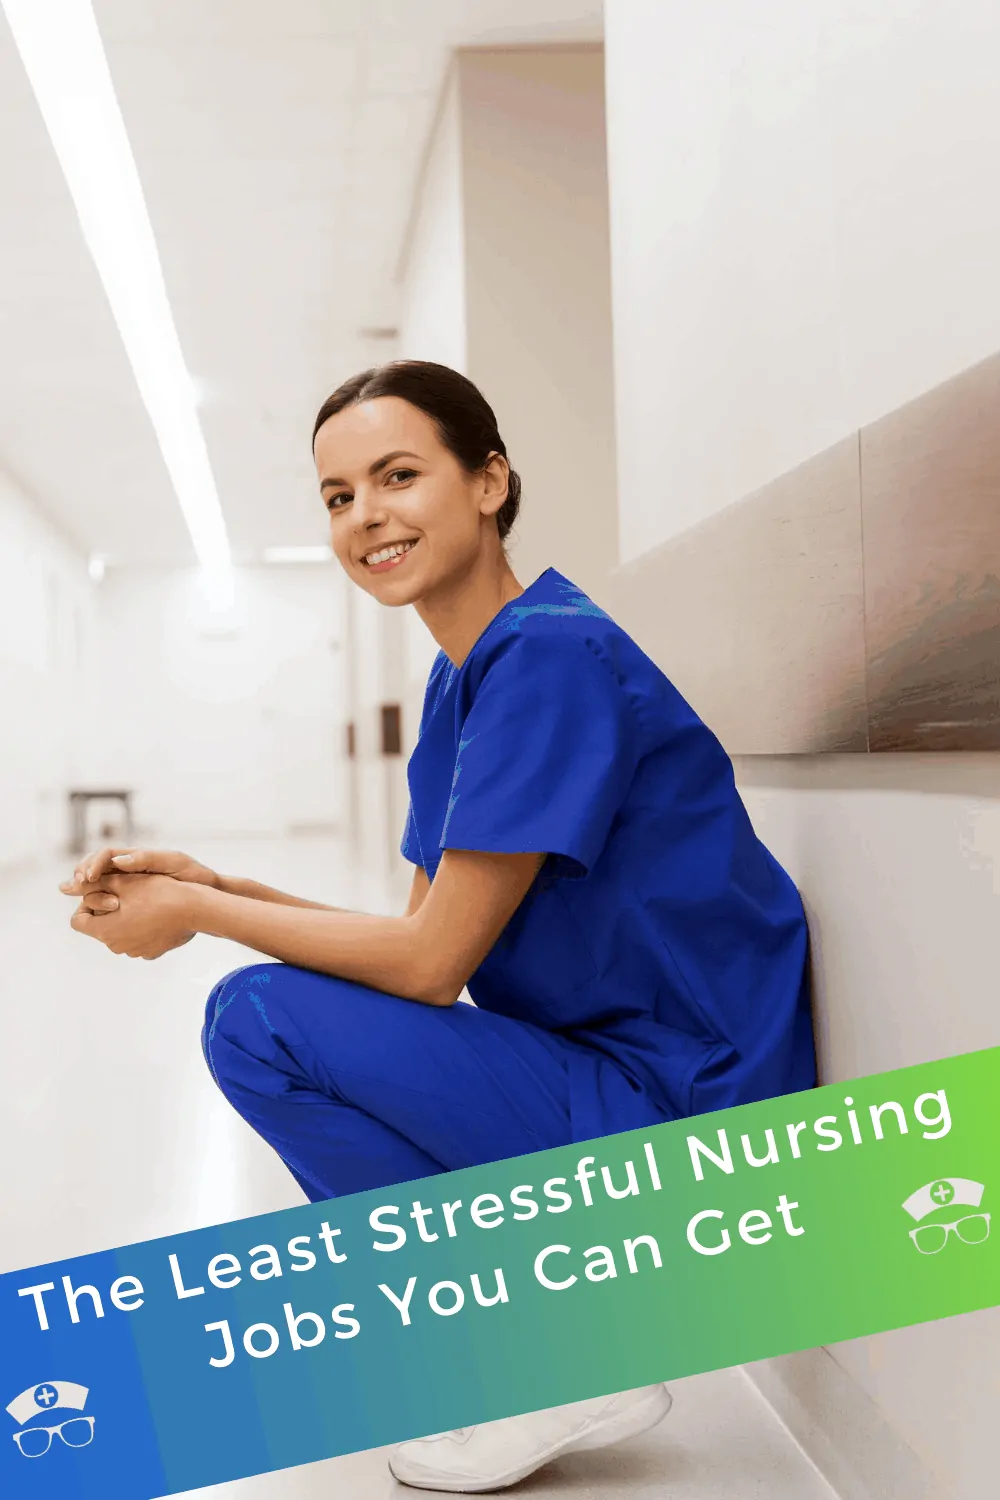 The Least Stressful Nursing Jobs You Can Get. When you have high anxiety, look for a job that doesn't require a lot from you. These are the least stressful nursing jobs out there. #thenerdynurse #nurse #nurses #nursingjobs #jobsfornurses #informaticsnurse #cruisenurse #schoolnurse 